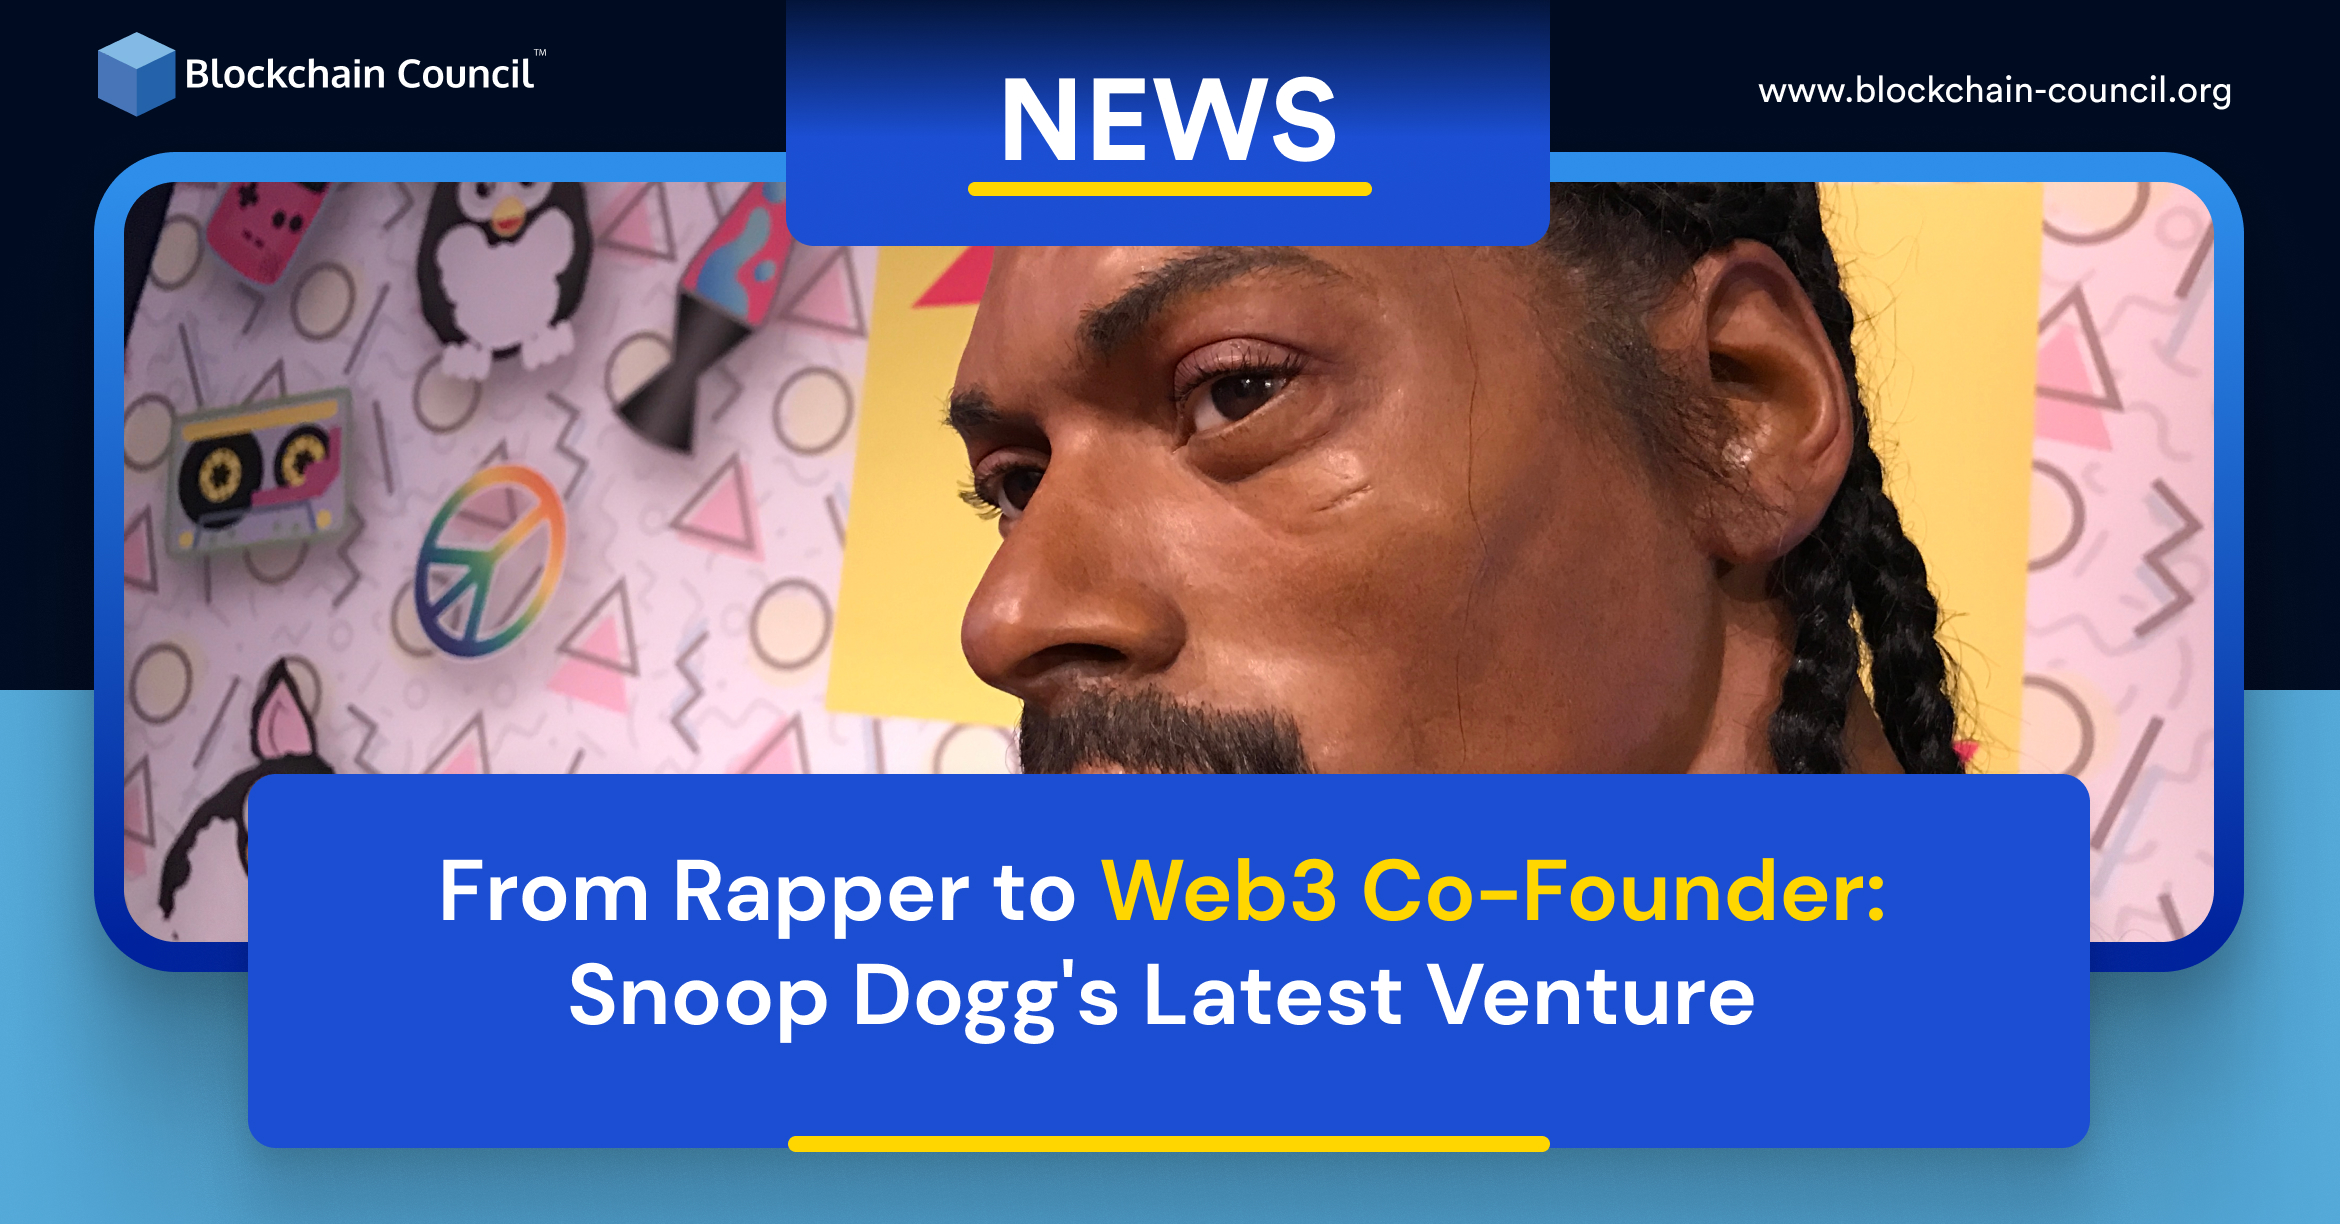 From Rapper to Web3 Co-Founder: Snoop Dogg's Latest Venture